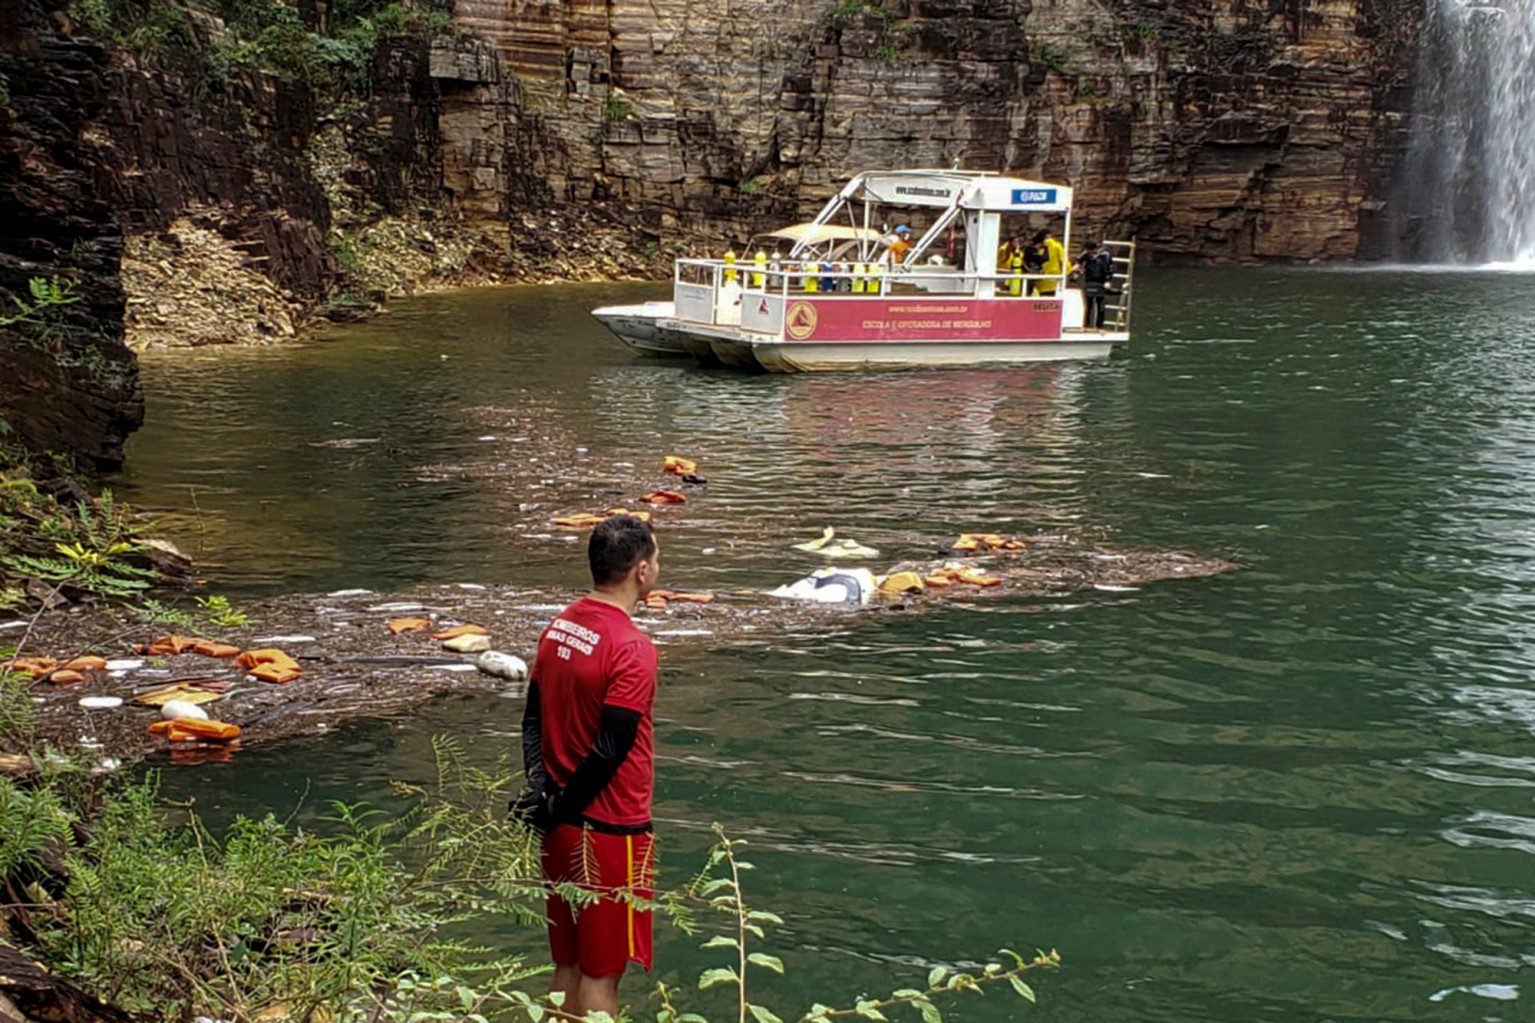 Falling Rocks Kill Two Boaters, Several Others Injured